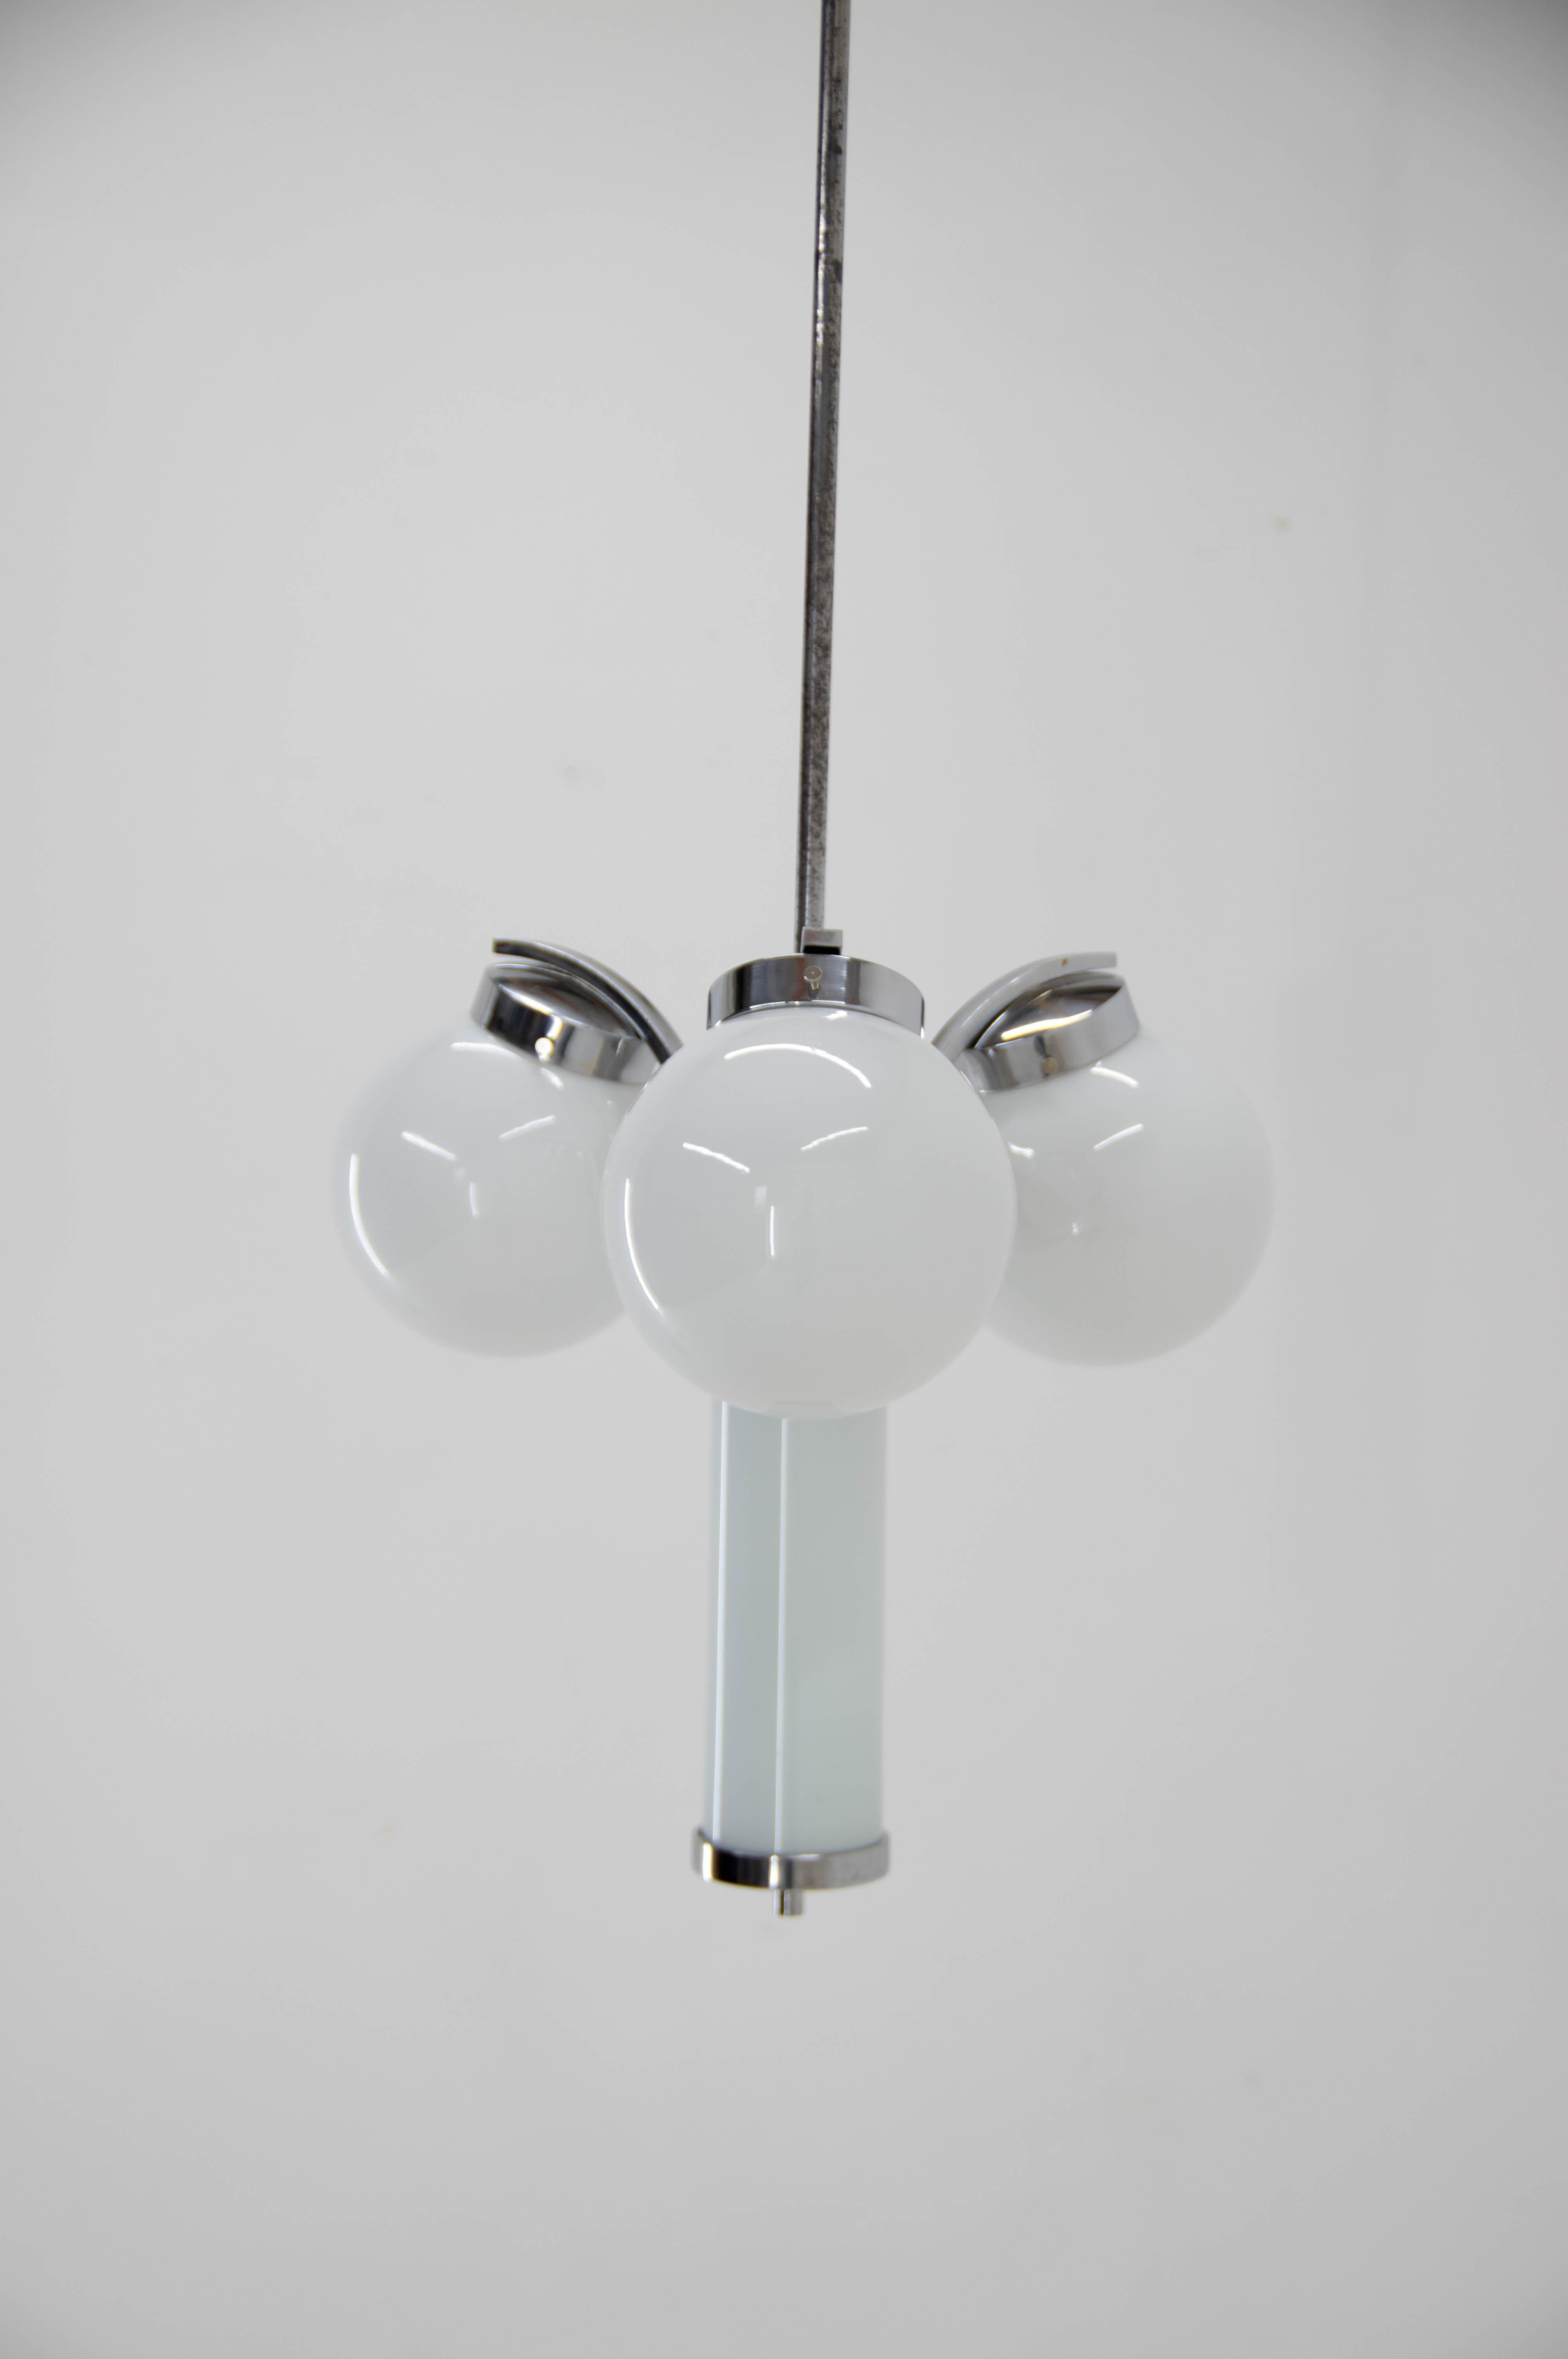 Rare Art Deco chandelier with one tubular and three globe glass shades.
Restored: polished, rewired - two separate circuits: 1+3x40W, E25-E27 bulbs
US wiring compatible.